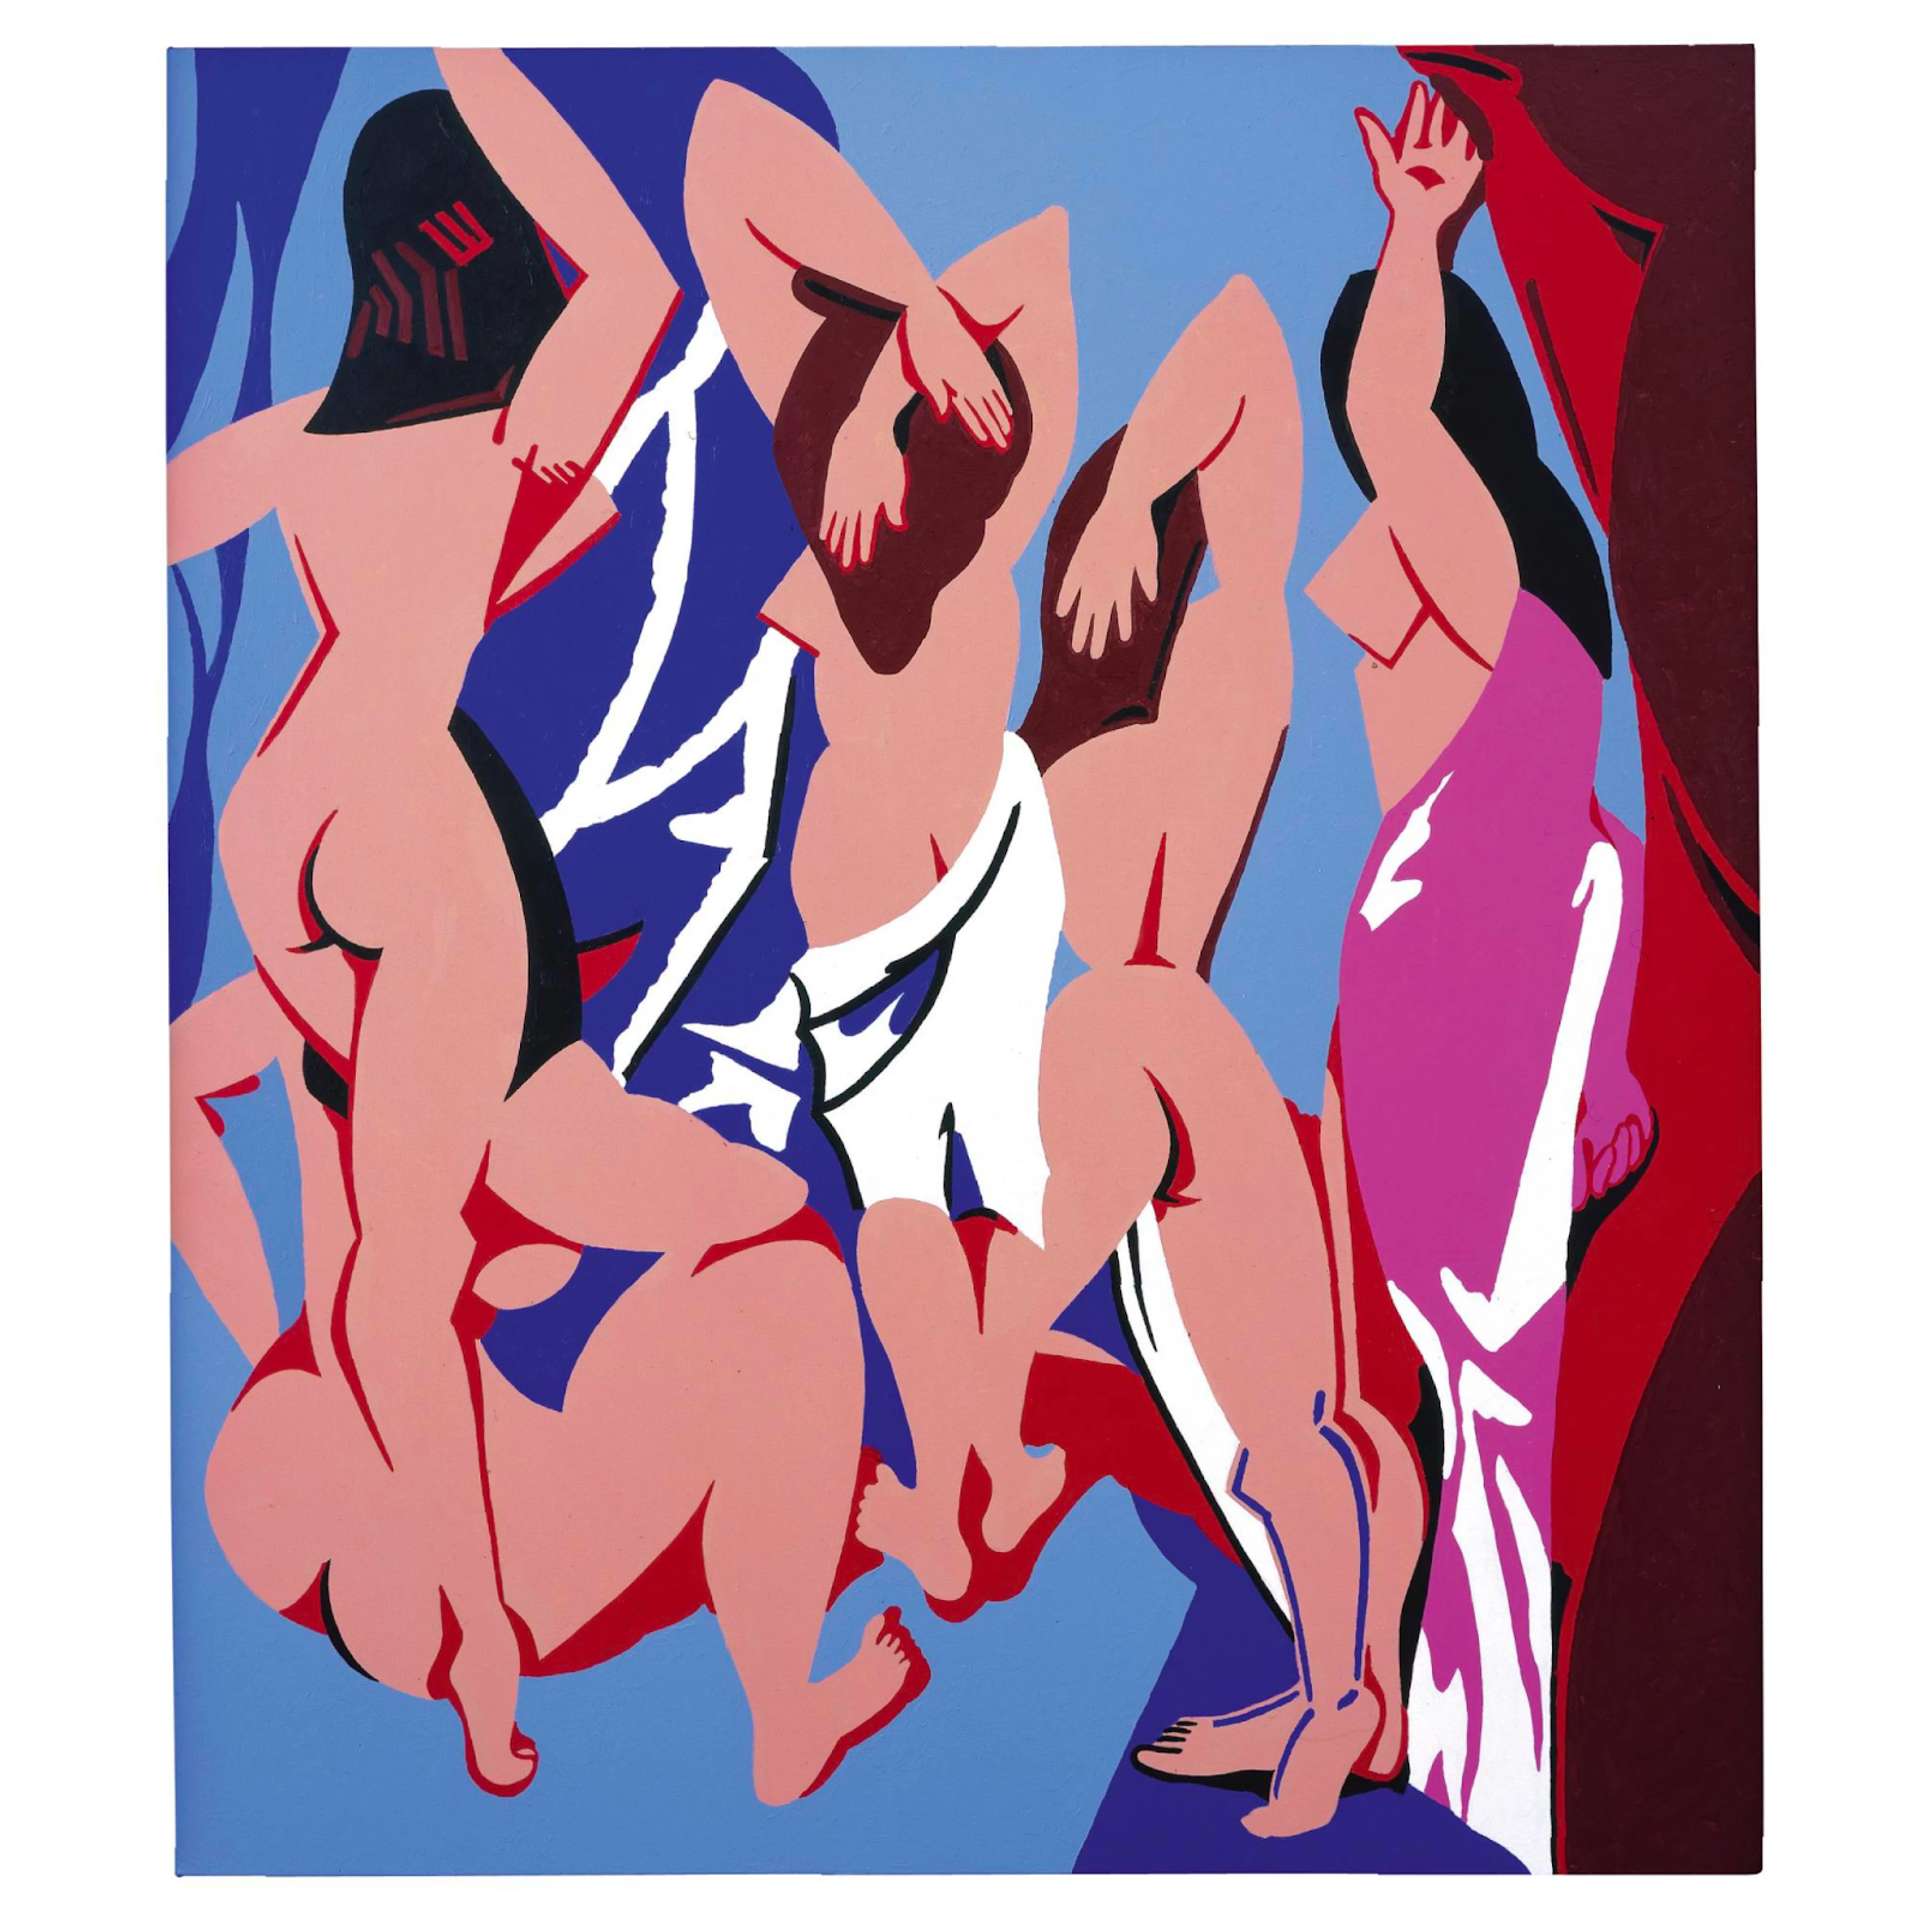 A rear view of five abstracted nude women in different poses against a backdrop of abstracted red and blue shapes.